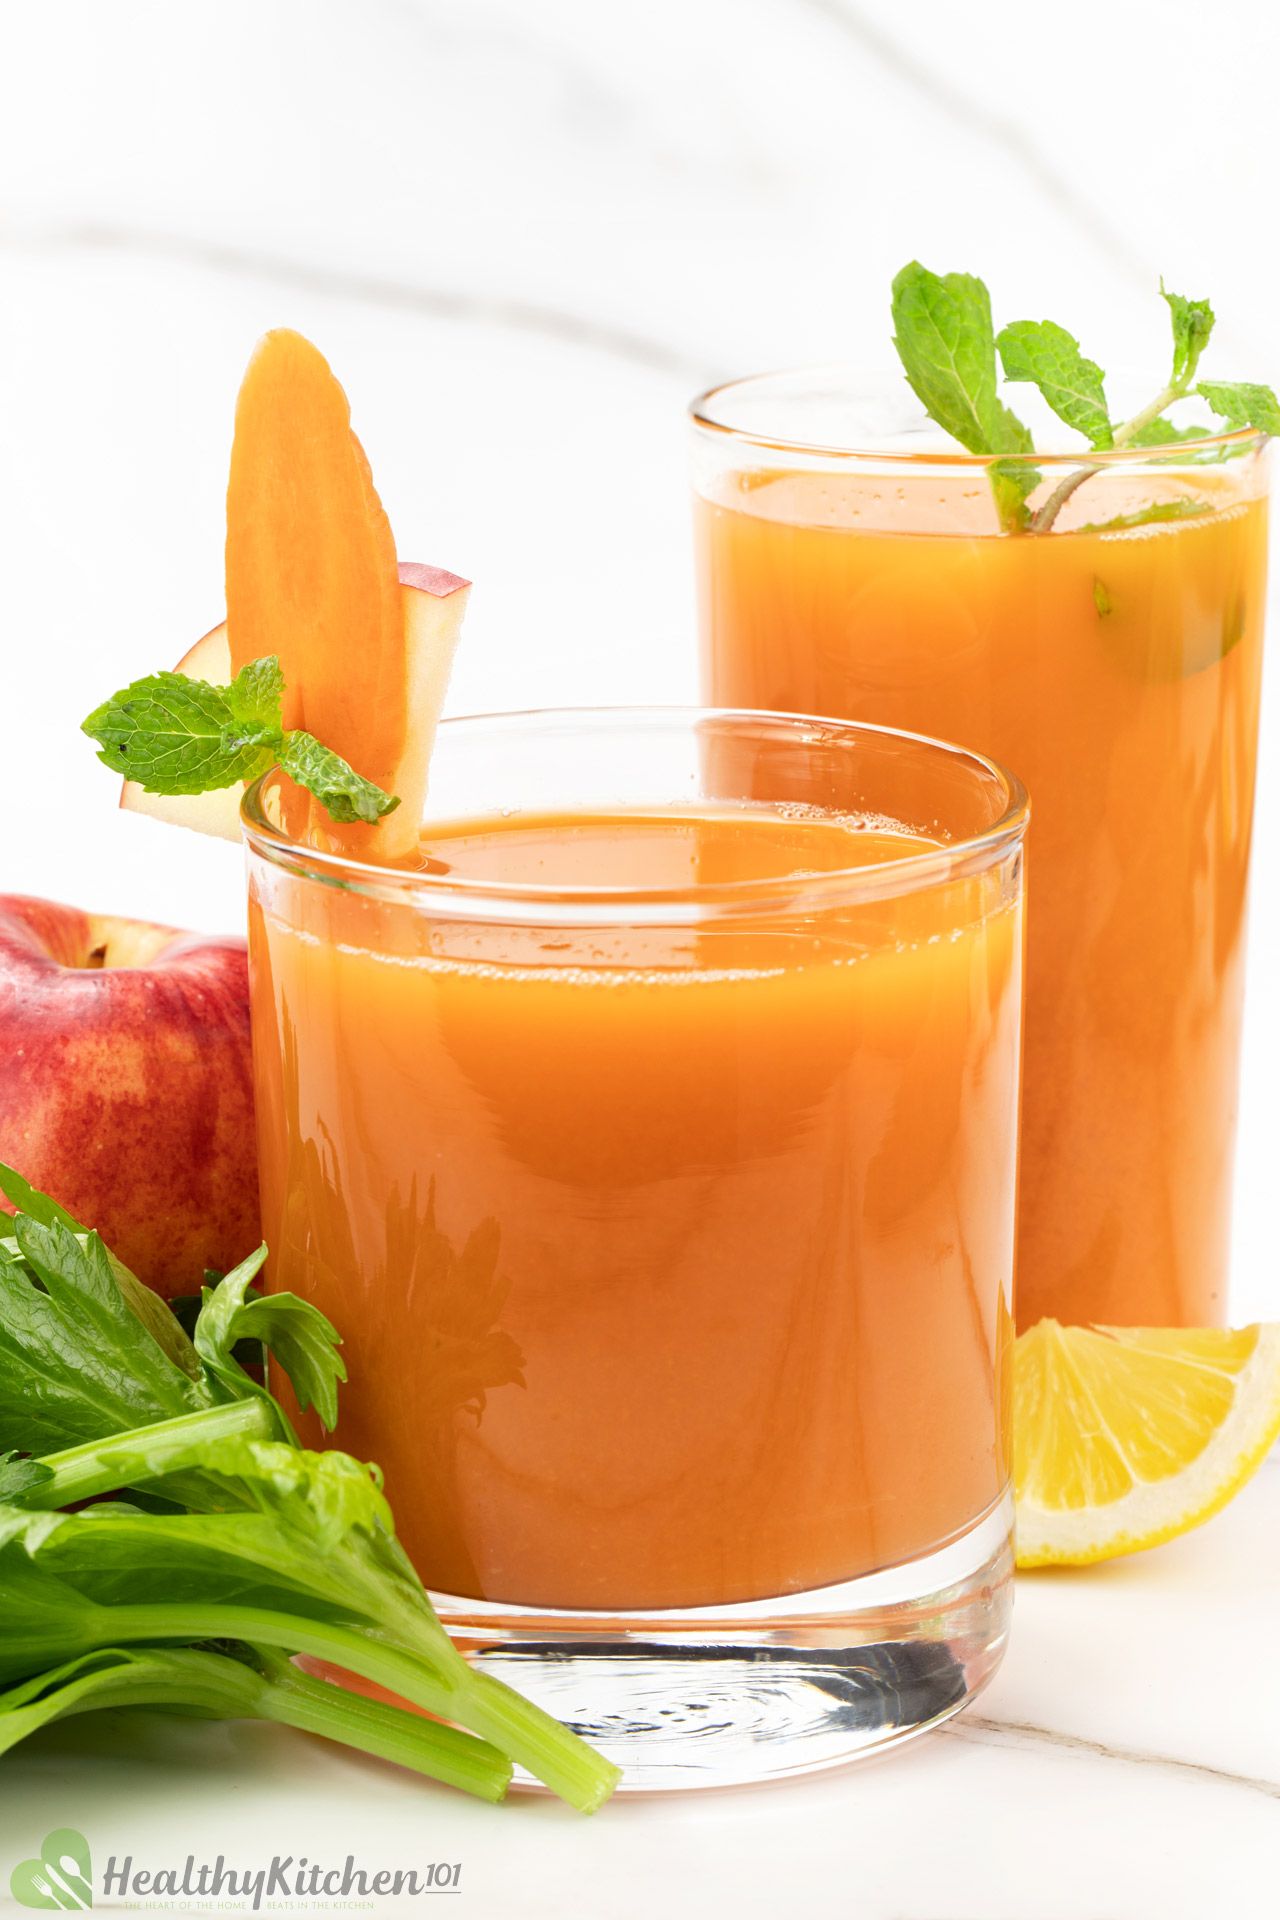 How to make Carrot and Celery Juice